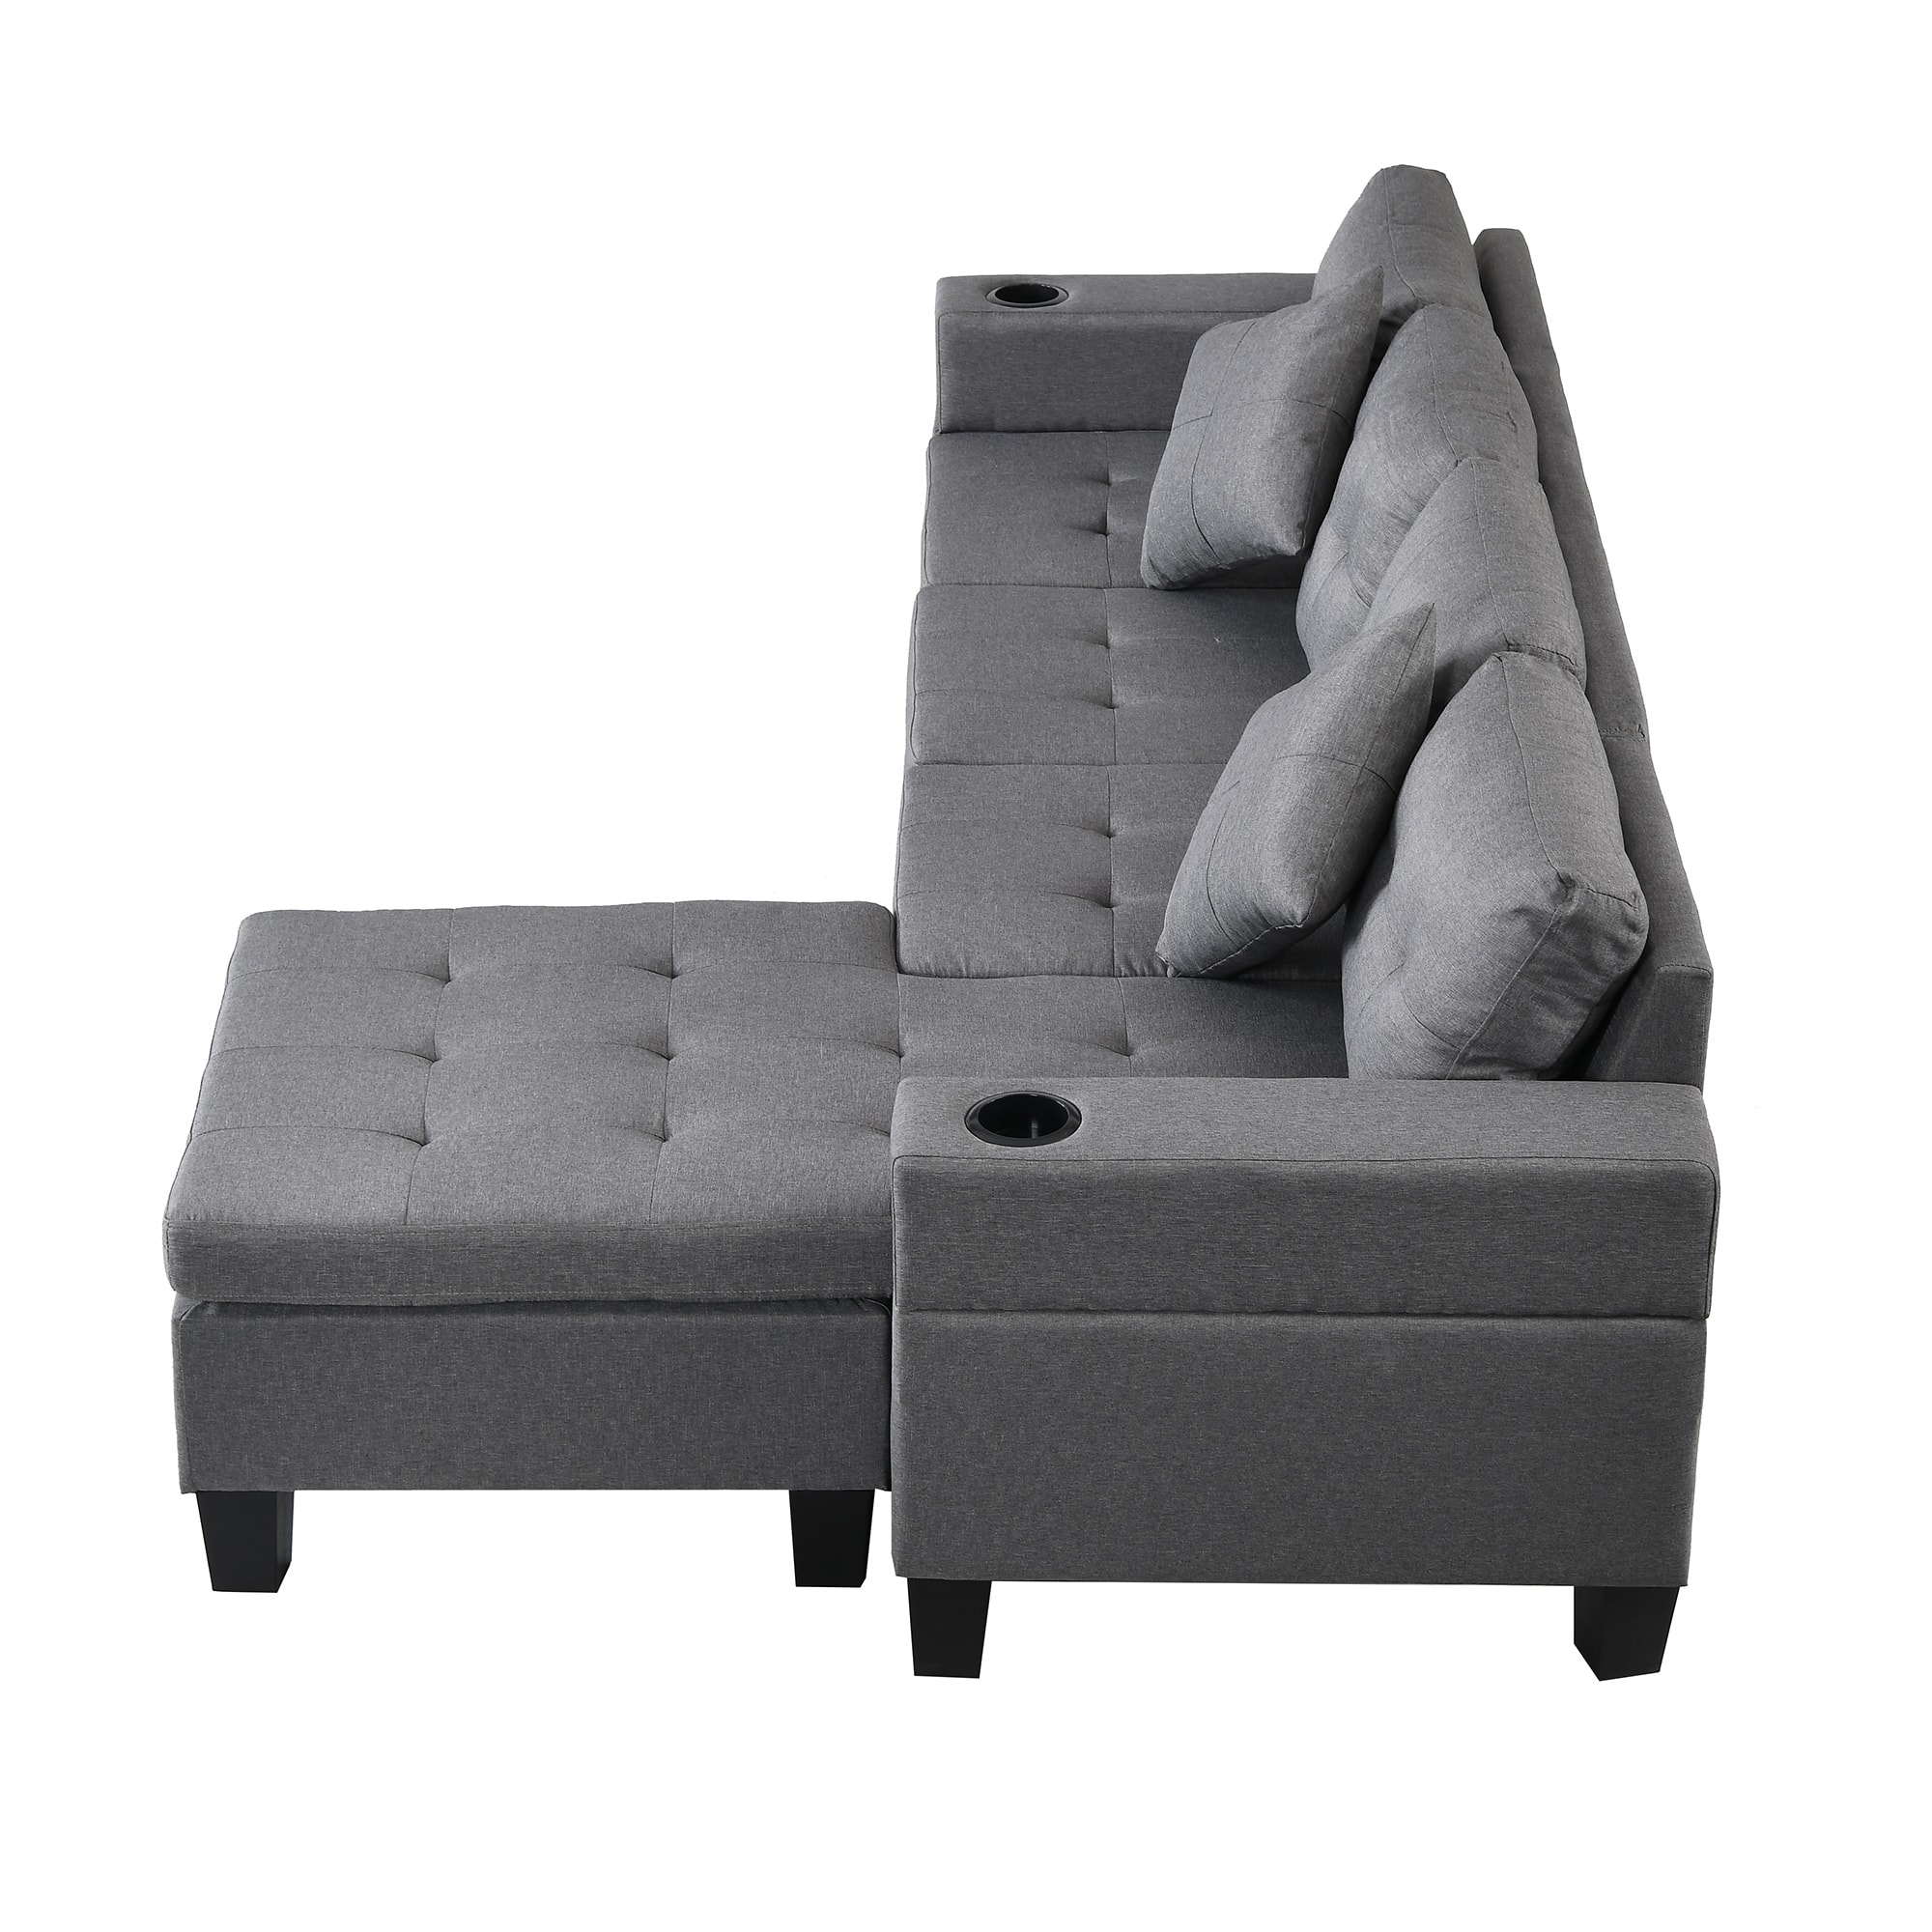 Modern 4-Seat Sectional Sofa Set with L-Shape Chaise Lounge, Cup ...